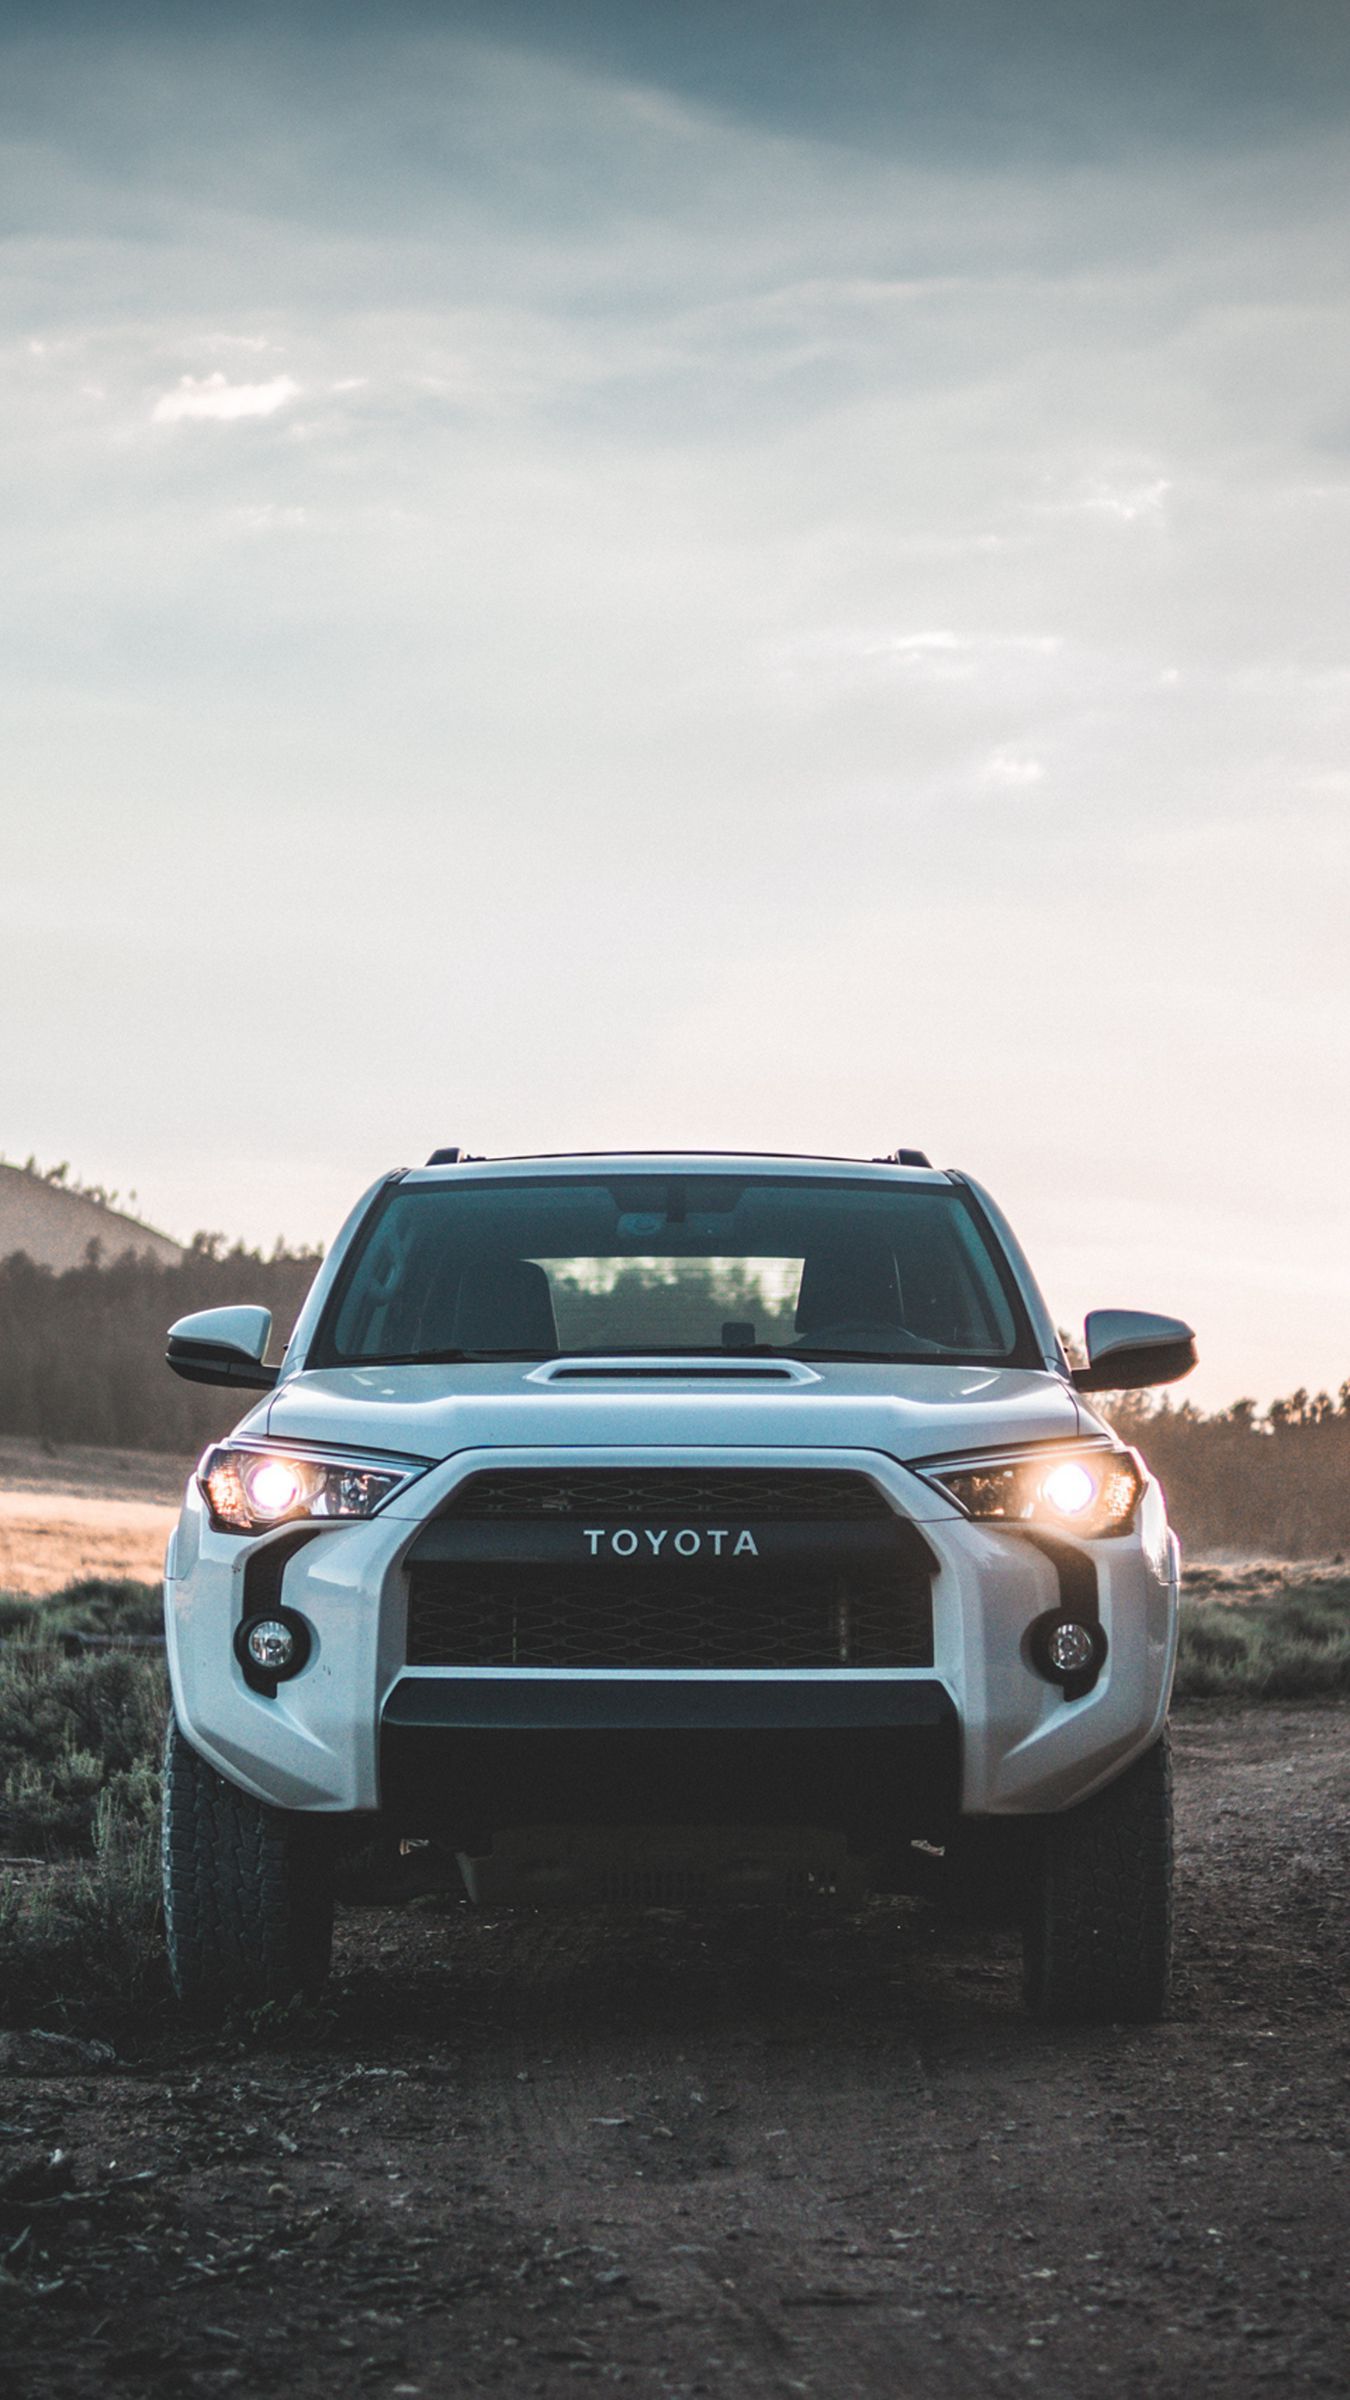 Toyota Iphone Wallpapers